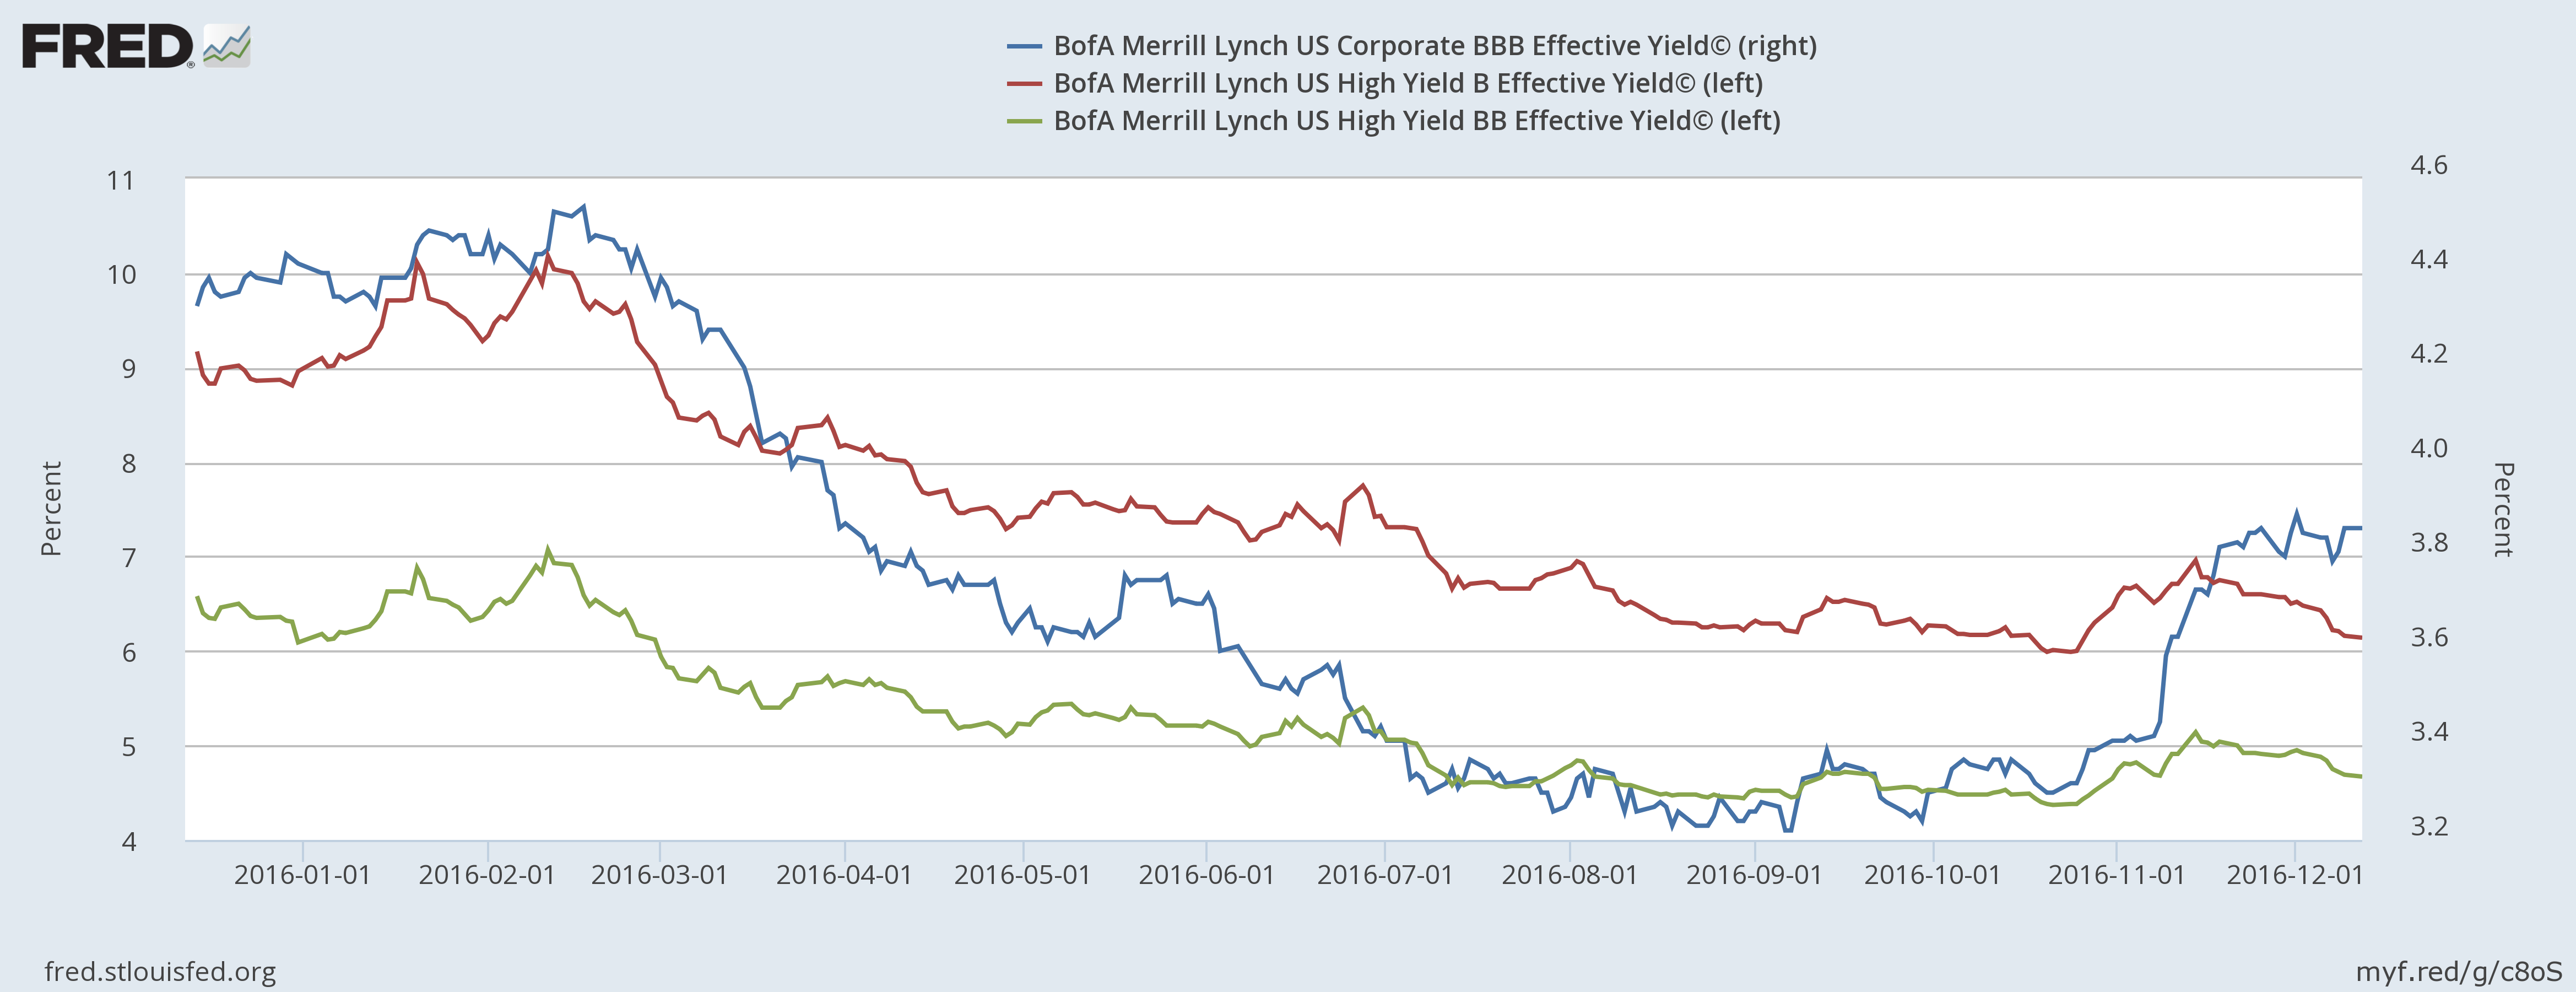 US Corporate Yields 2016